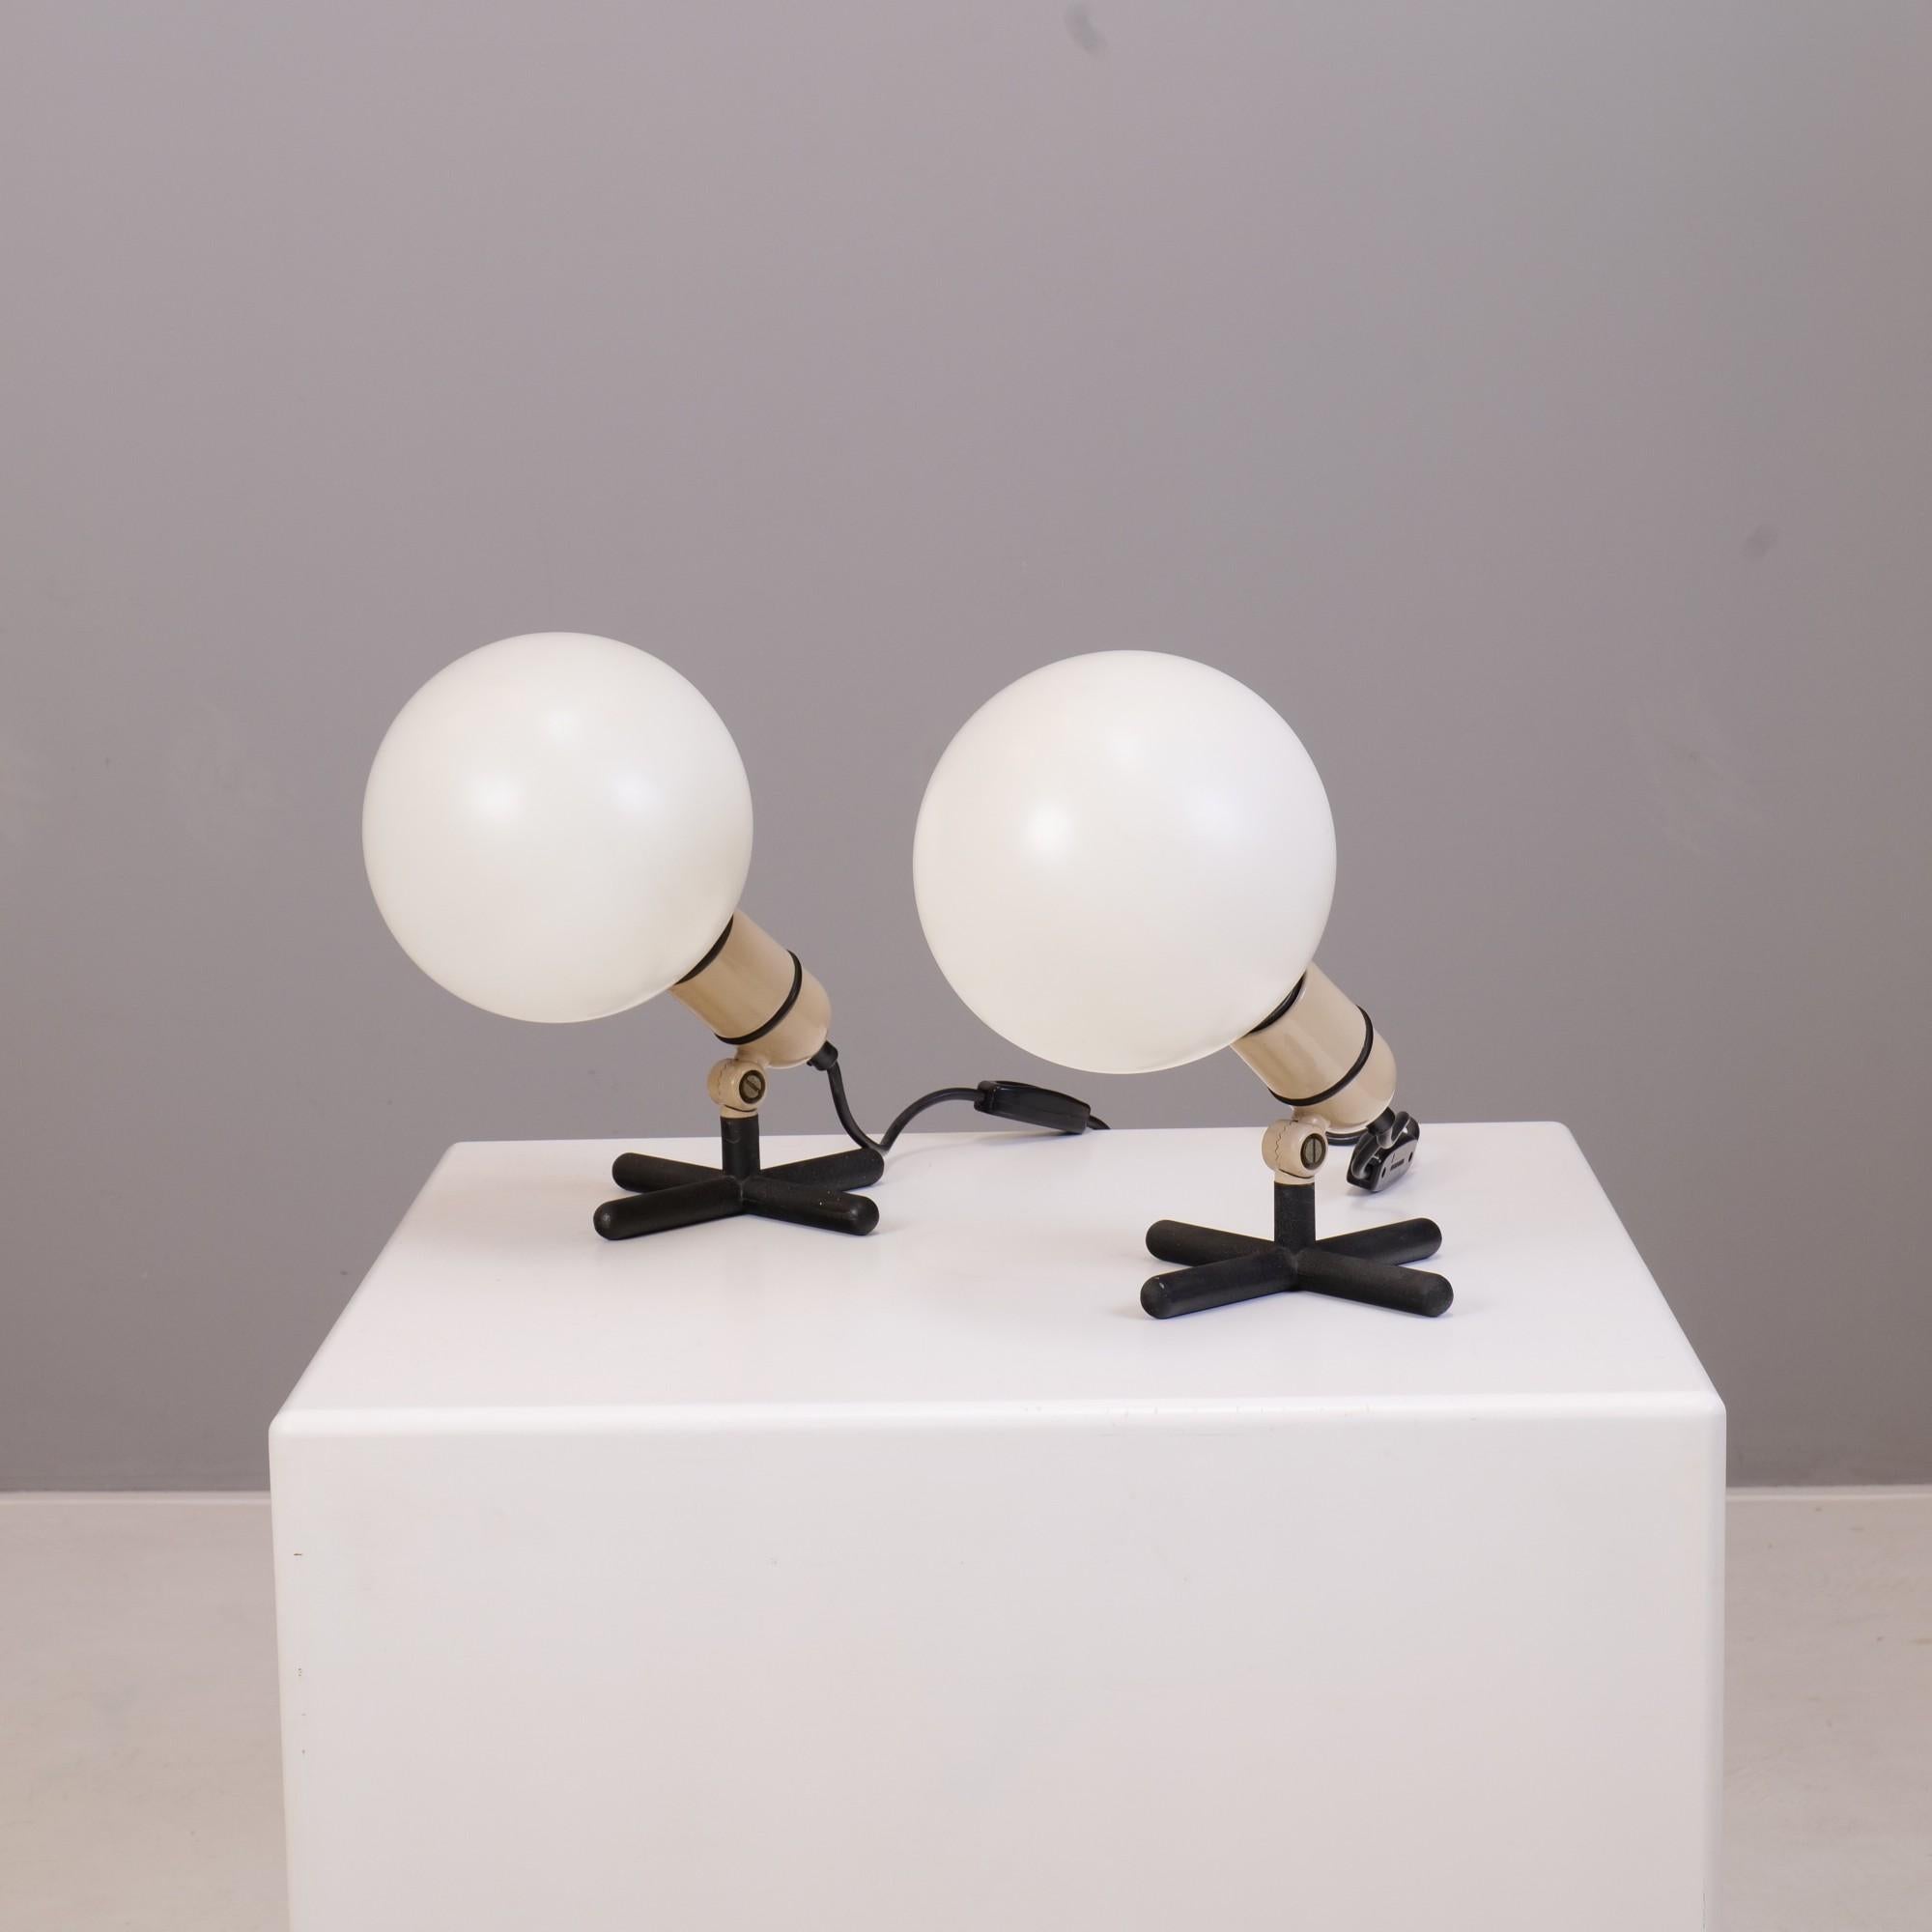 Space Age Set of 2 Bubble Lamps by Jacques Biny for Lita, 1960's France